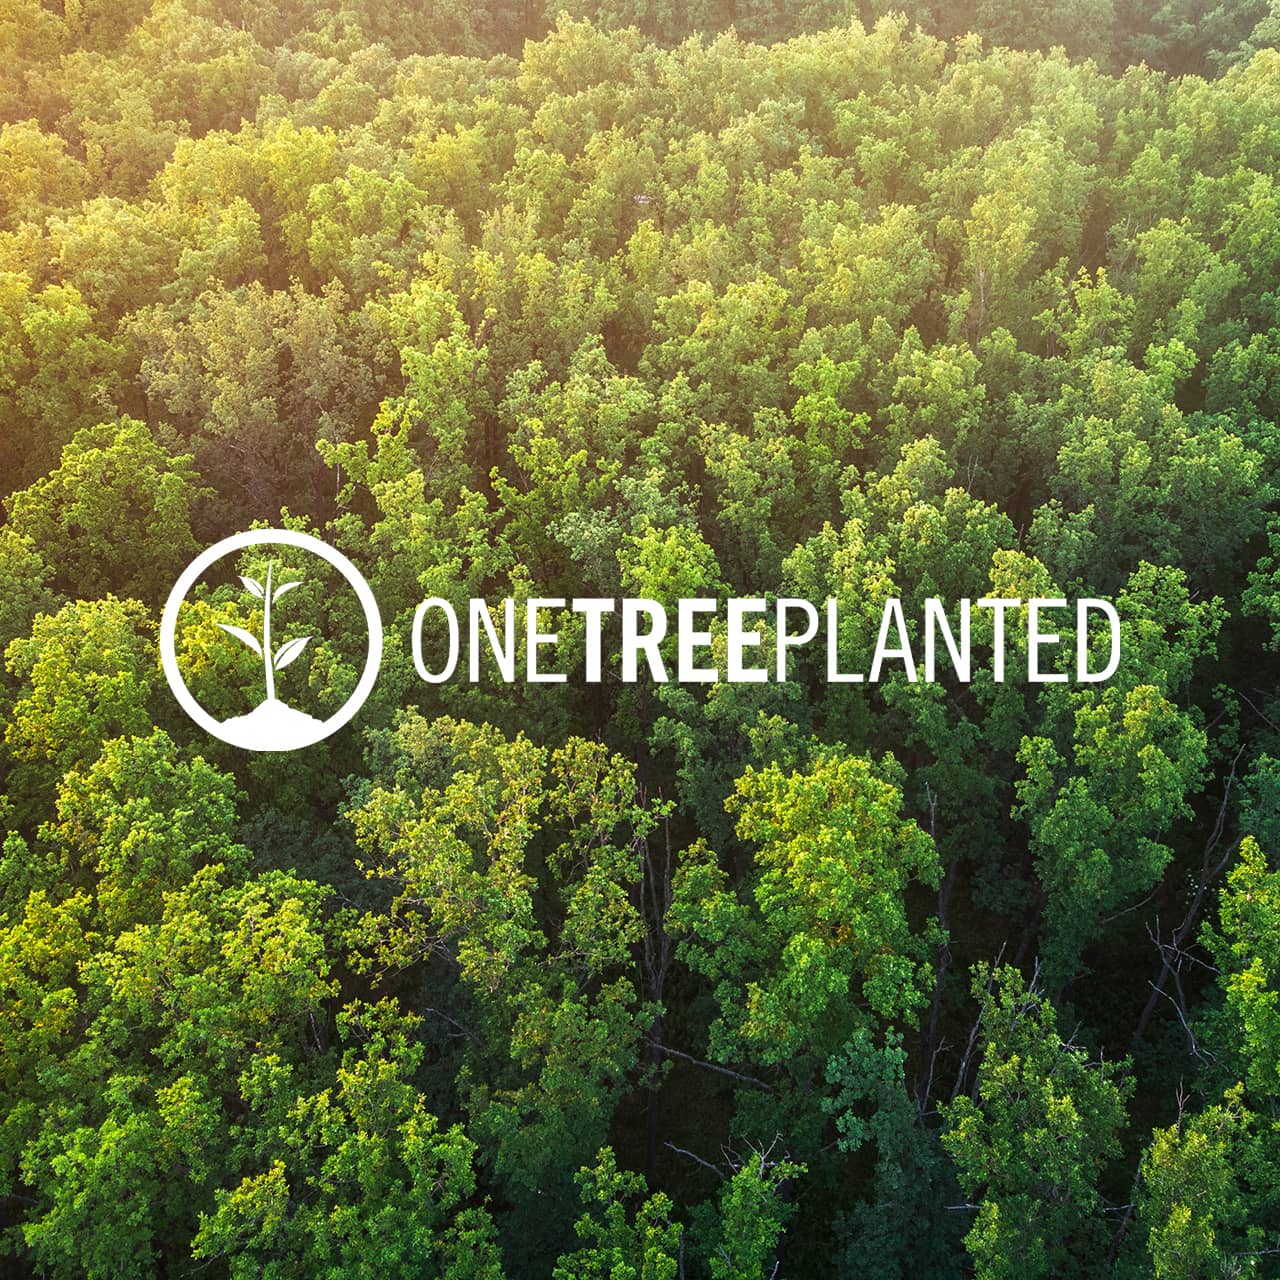 One Tree Planted Logo Over Forest.